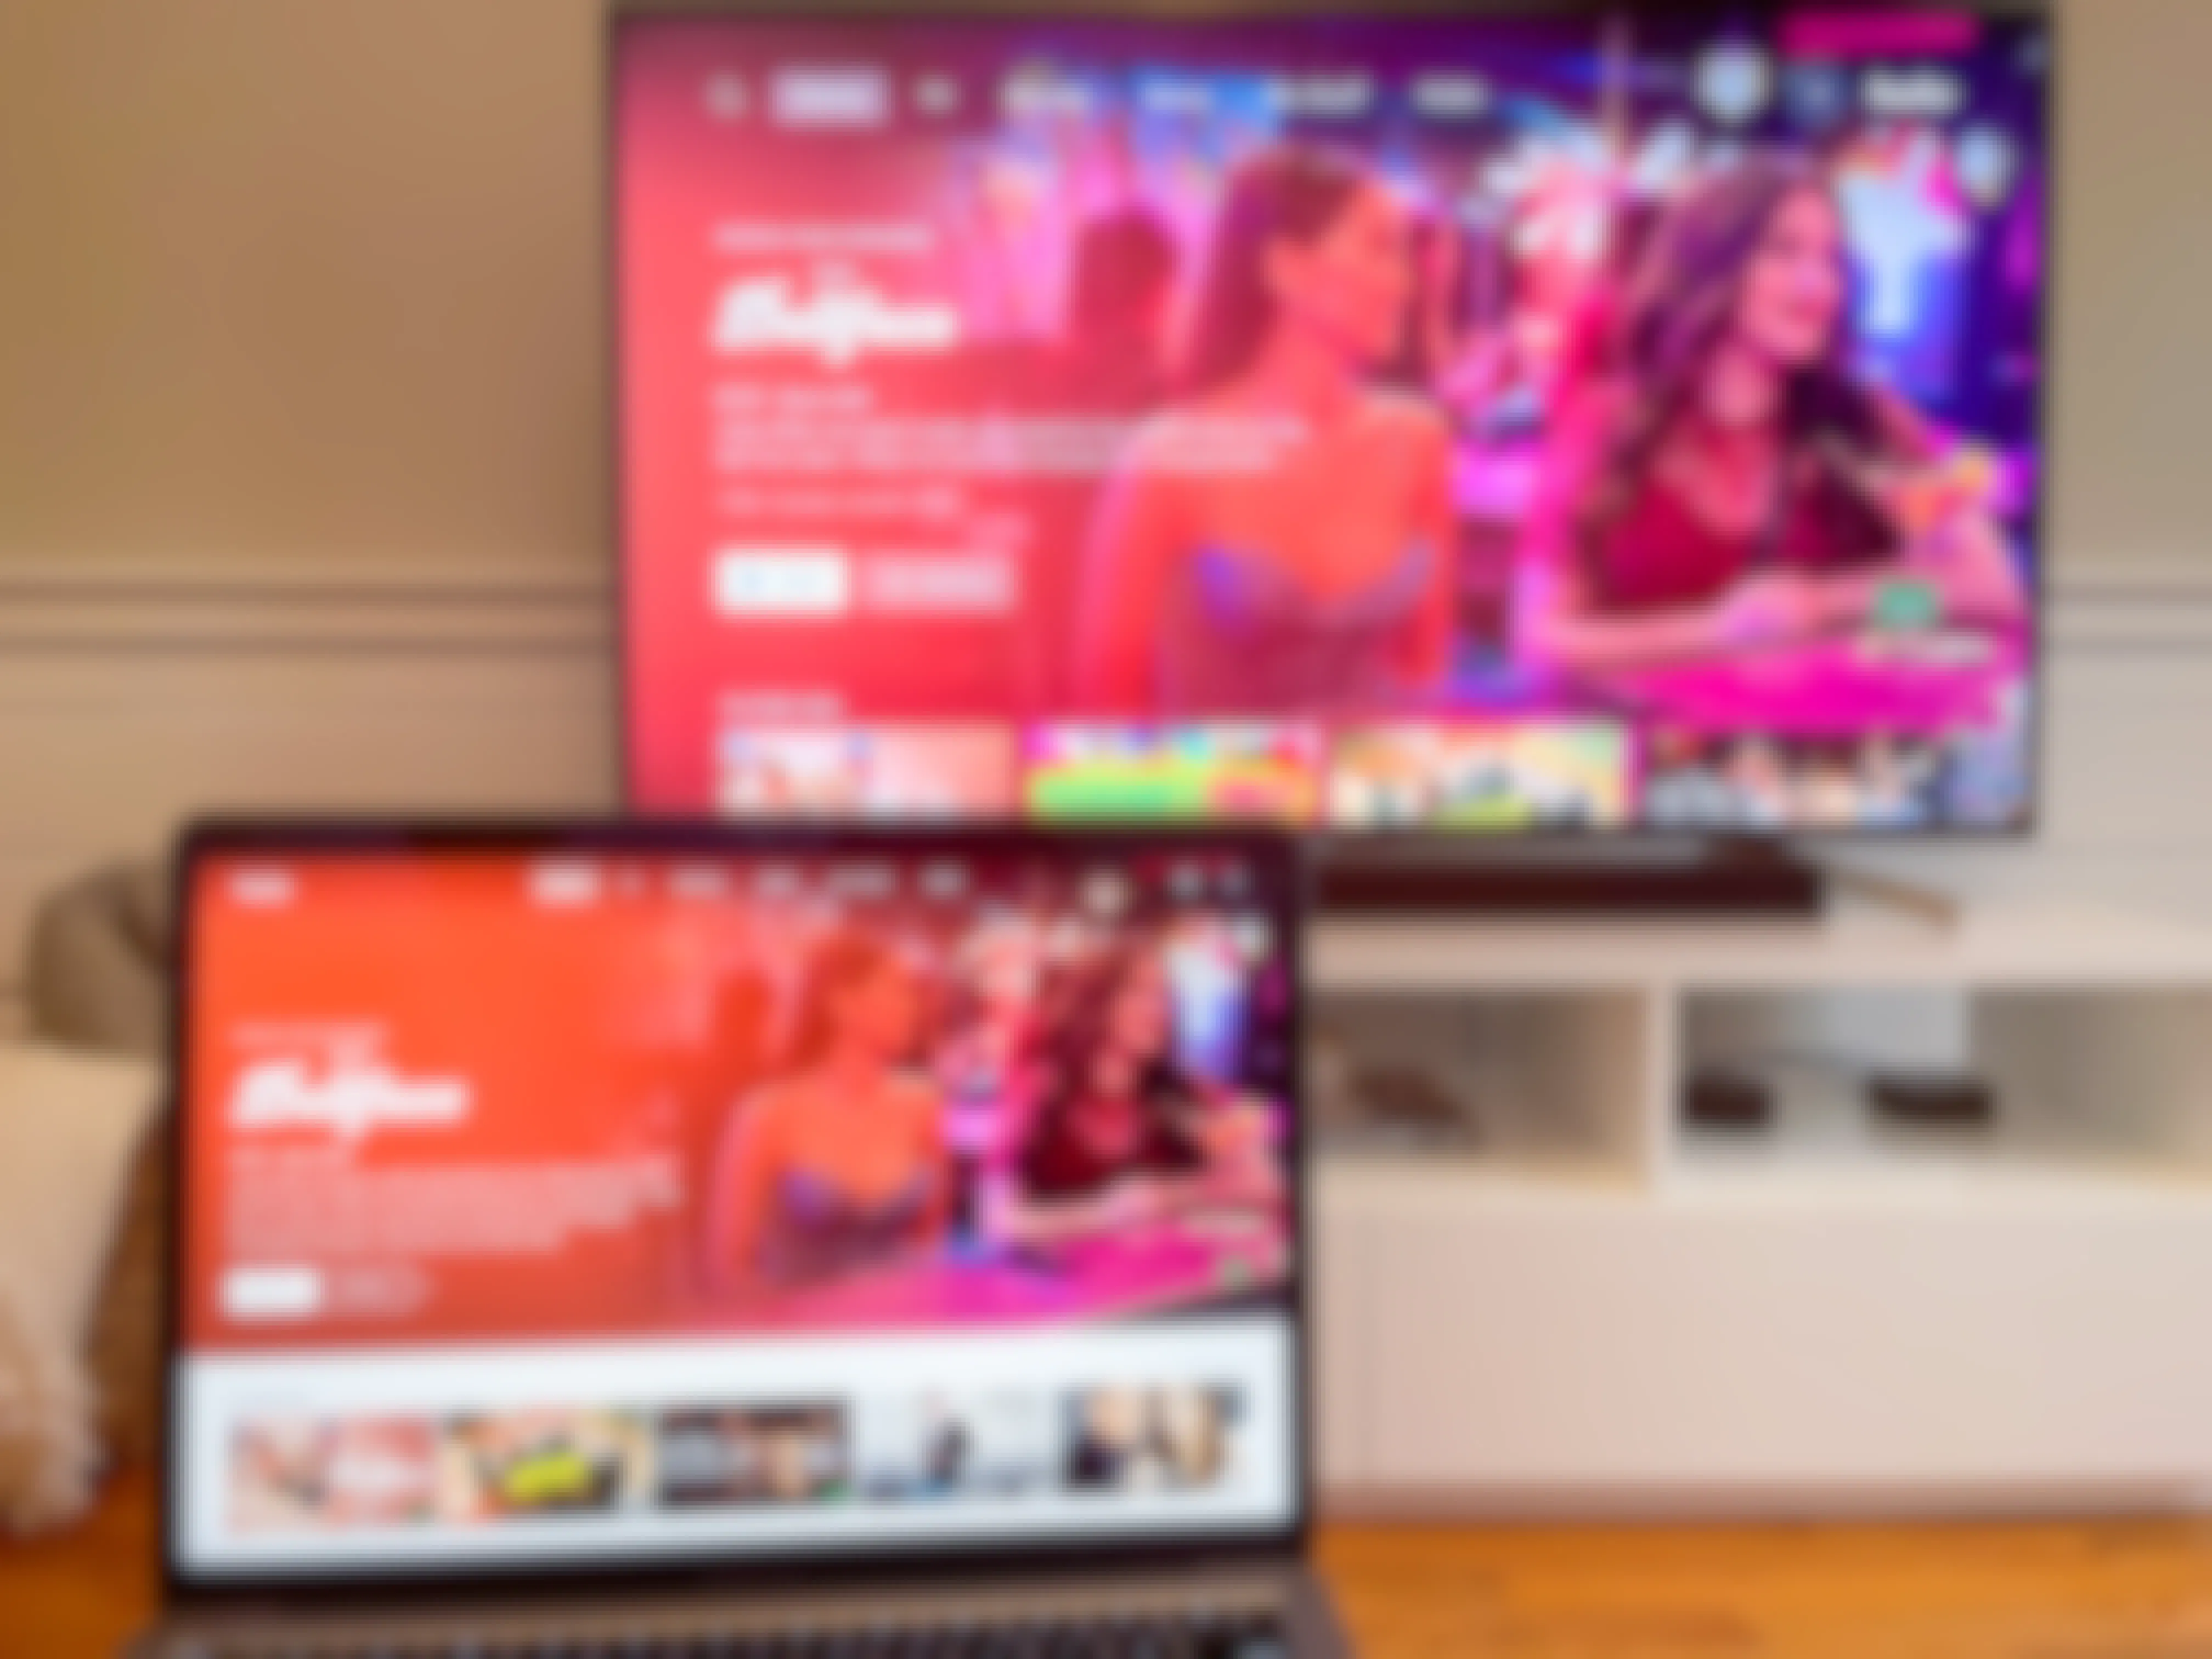 streaming hulu on two devices at once: on the tv and on a laptop